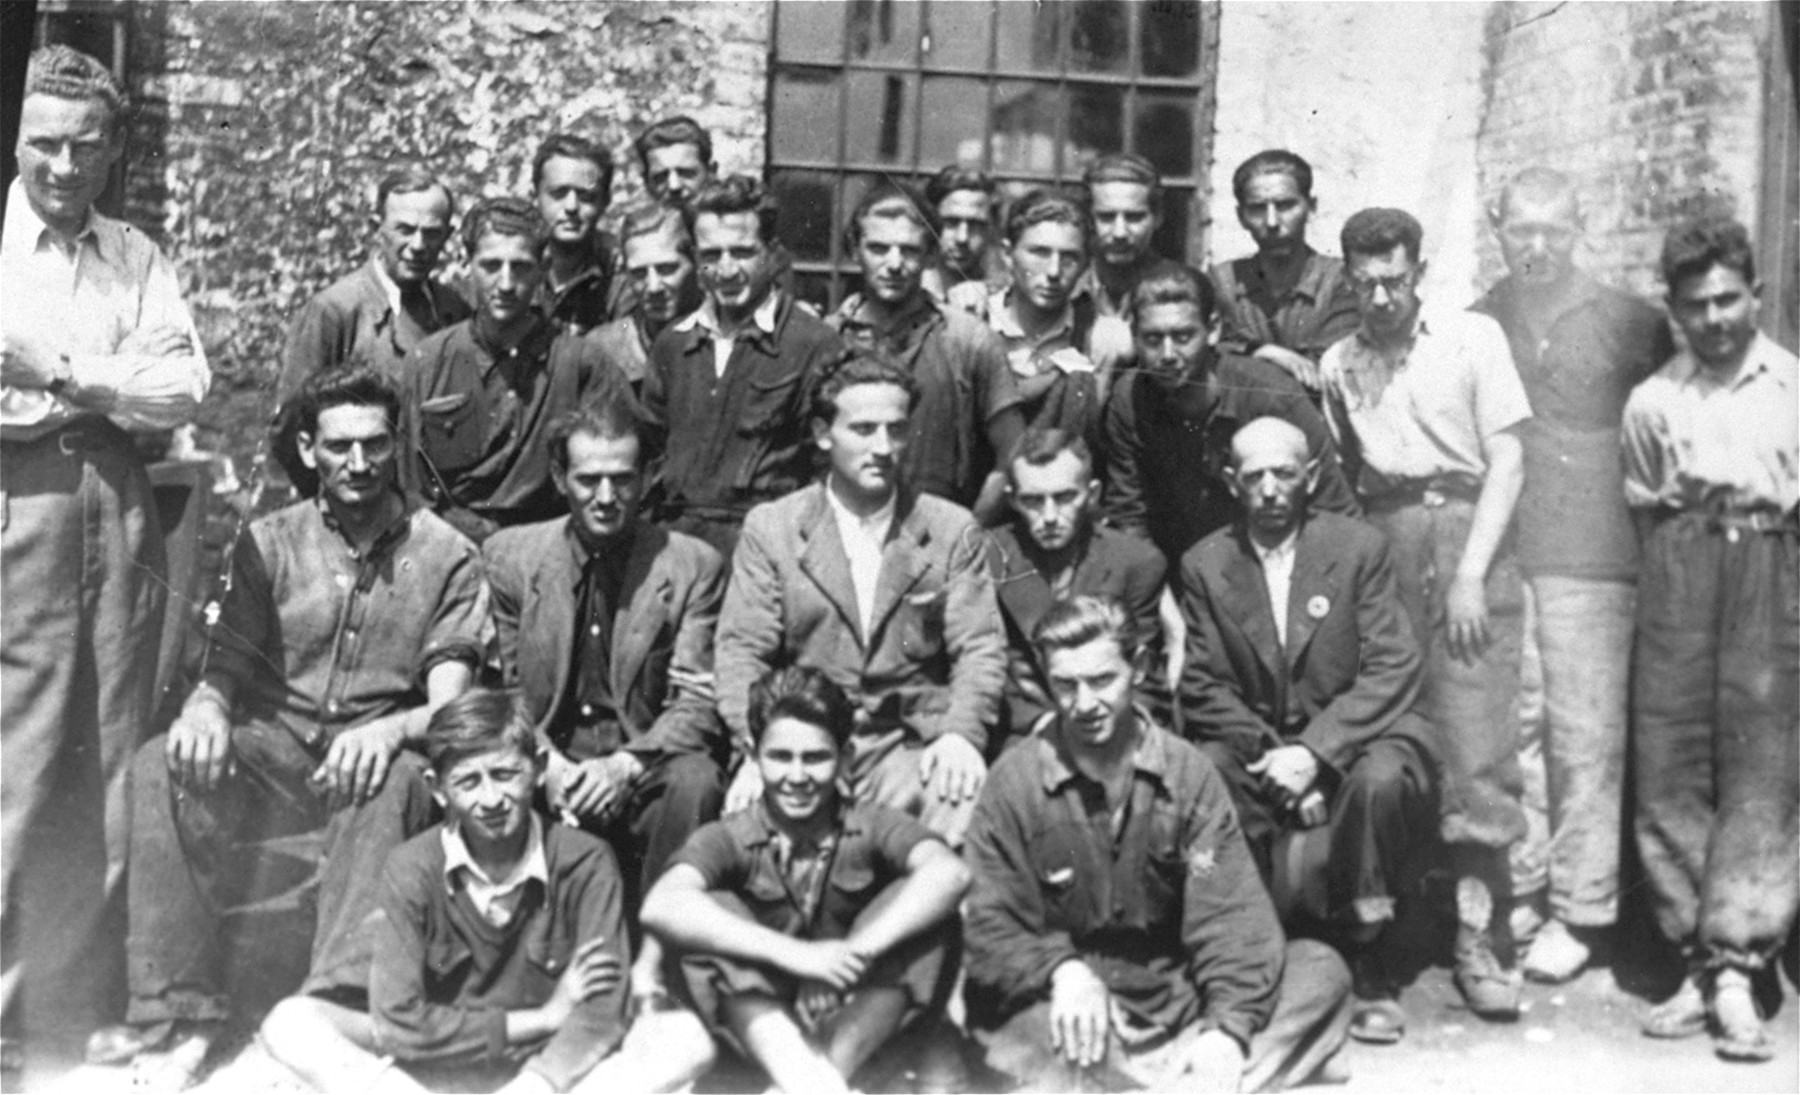 Group portrait of Jewish forced laborers at the Turnatoria, the machine shop established by Siegfried Jagendorf in the Mogilev-Podolskiy foundry.

Pictured in the center is Max Schmidt, an engineer from Cernauti who headed the lathe and power plant department of the Turnatoria.  Also pictured is Max Auslander (standing in the back row, seventh from the left). Friedrich Haas is pictured sitting in the front row center.  Seated in the second row on the far right is the manager, Engineer Josef Schmidt.